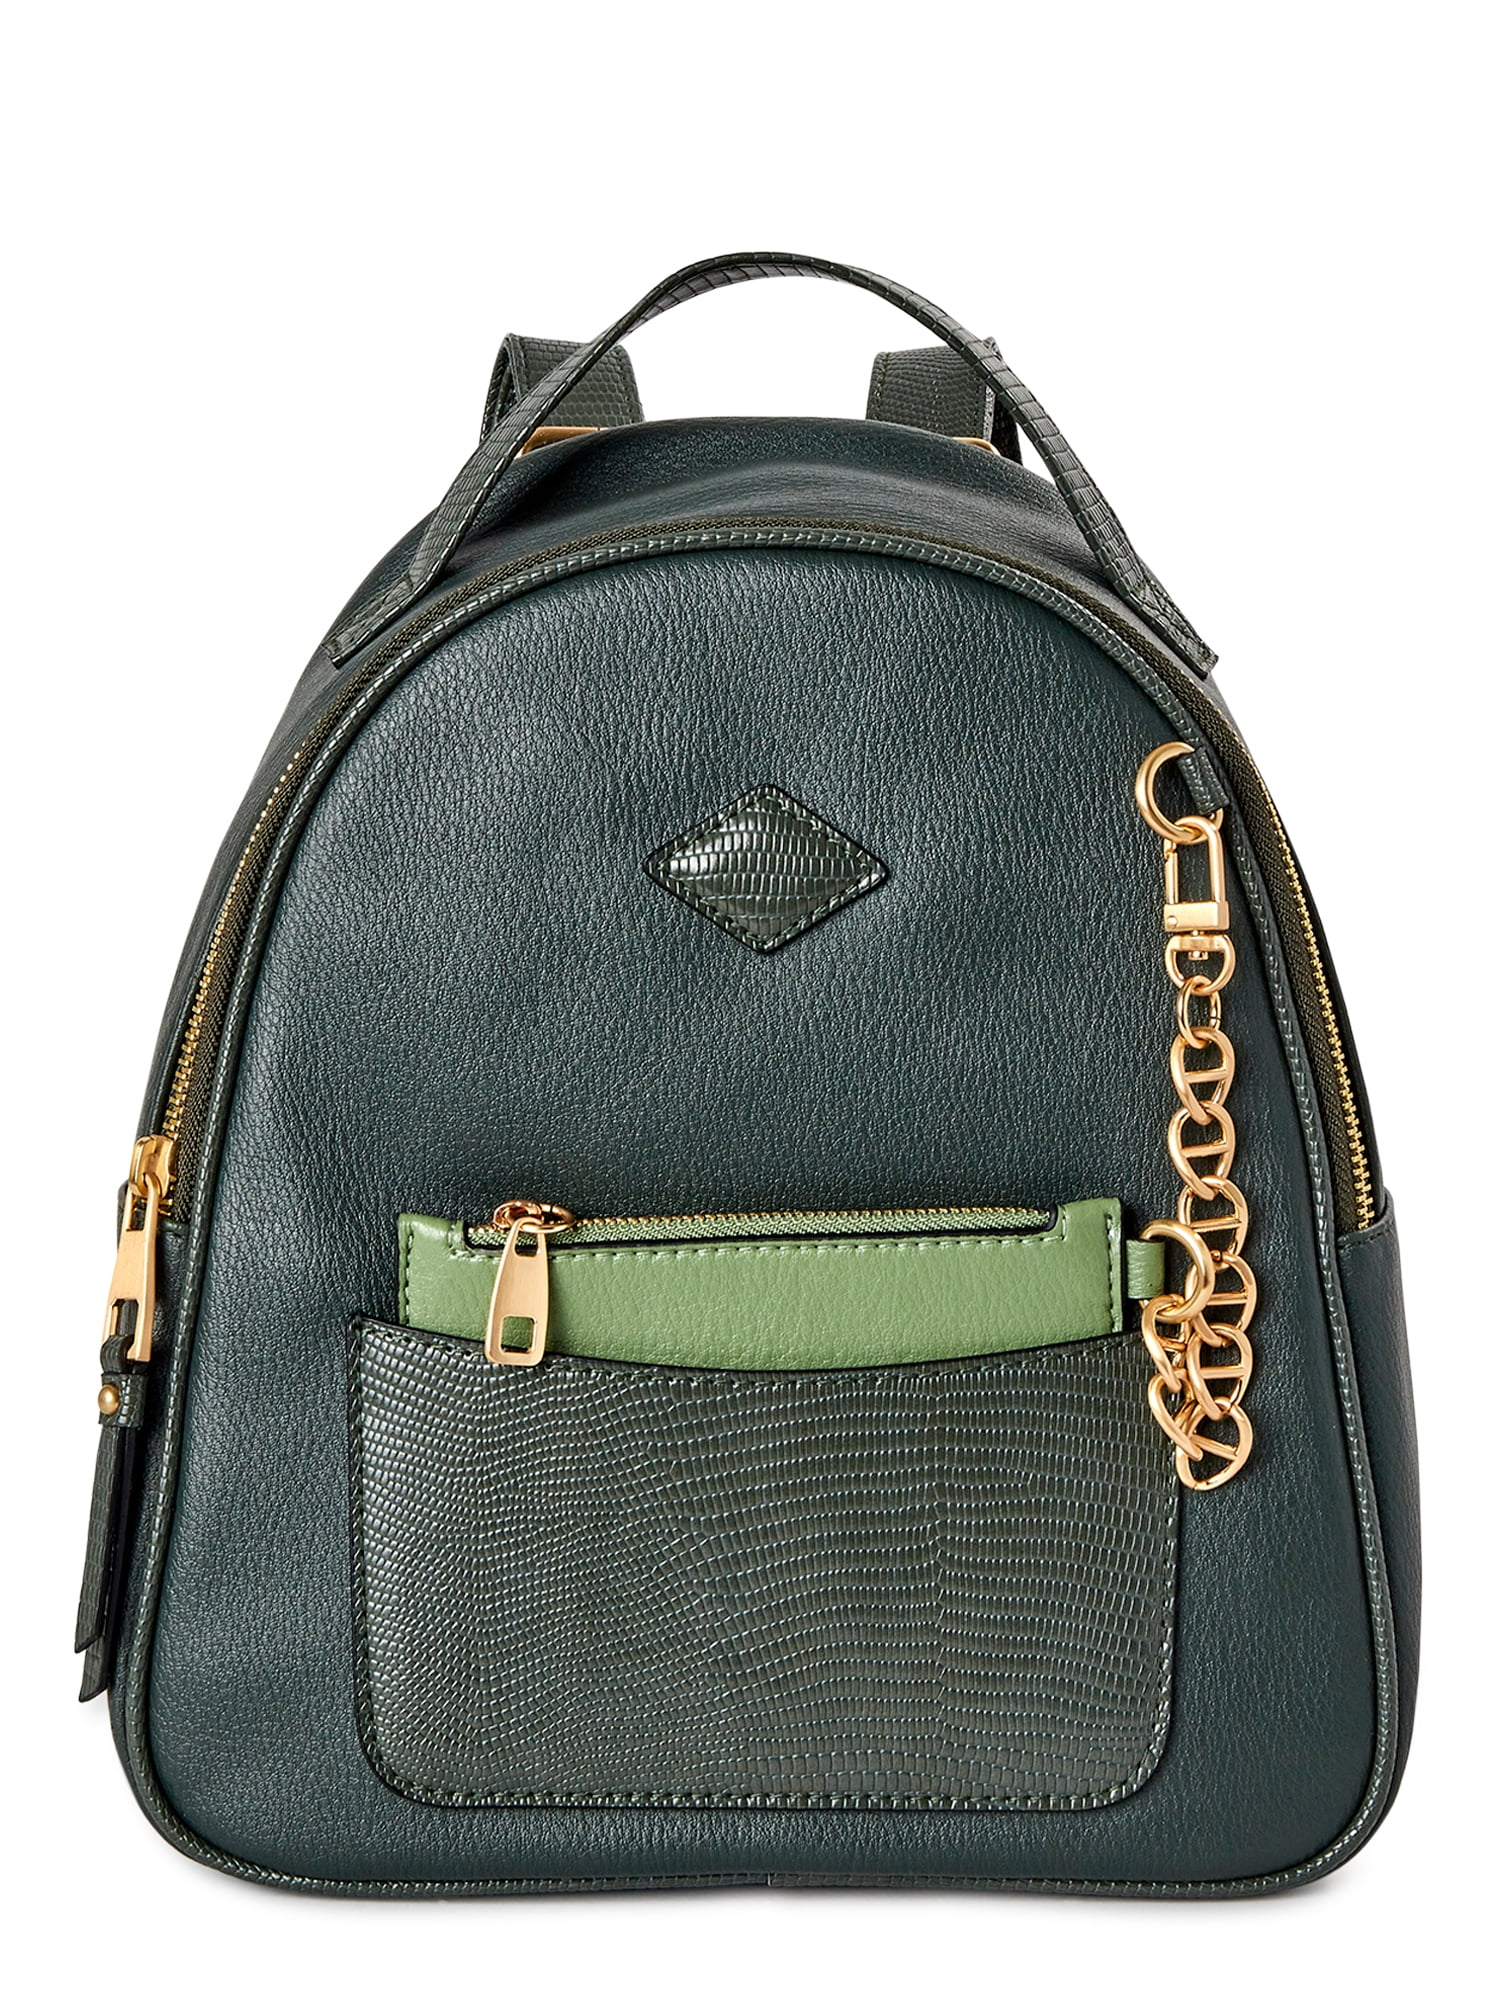 Cedella Marley x Fossil International Women's Day Limited Edition Parker  Backpack - ZB1725210 - Fossil